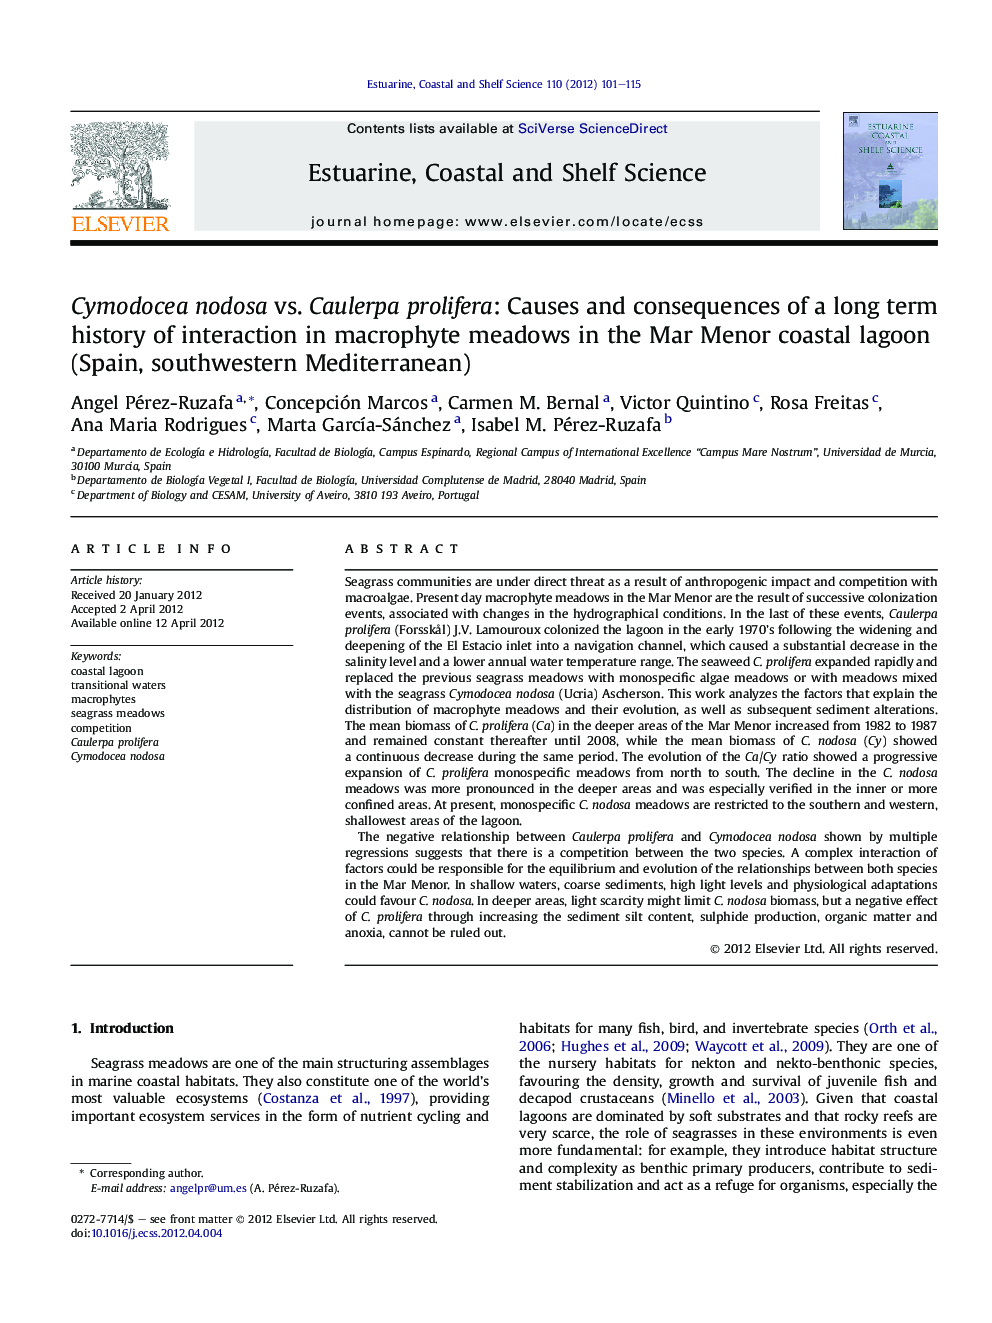 Cymodocea nodosa vs. Caulerpa prolifera: Causes and consequences of a long term history of interaction in macrophyte meadows in the Mar Menor coastal lagoon (Spain, southwestern Mediterranean)